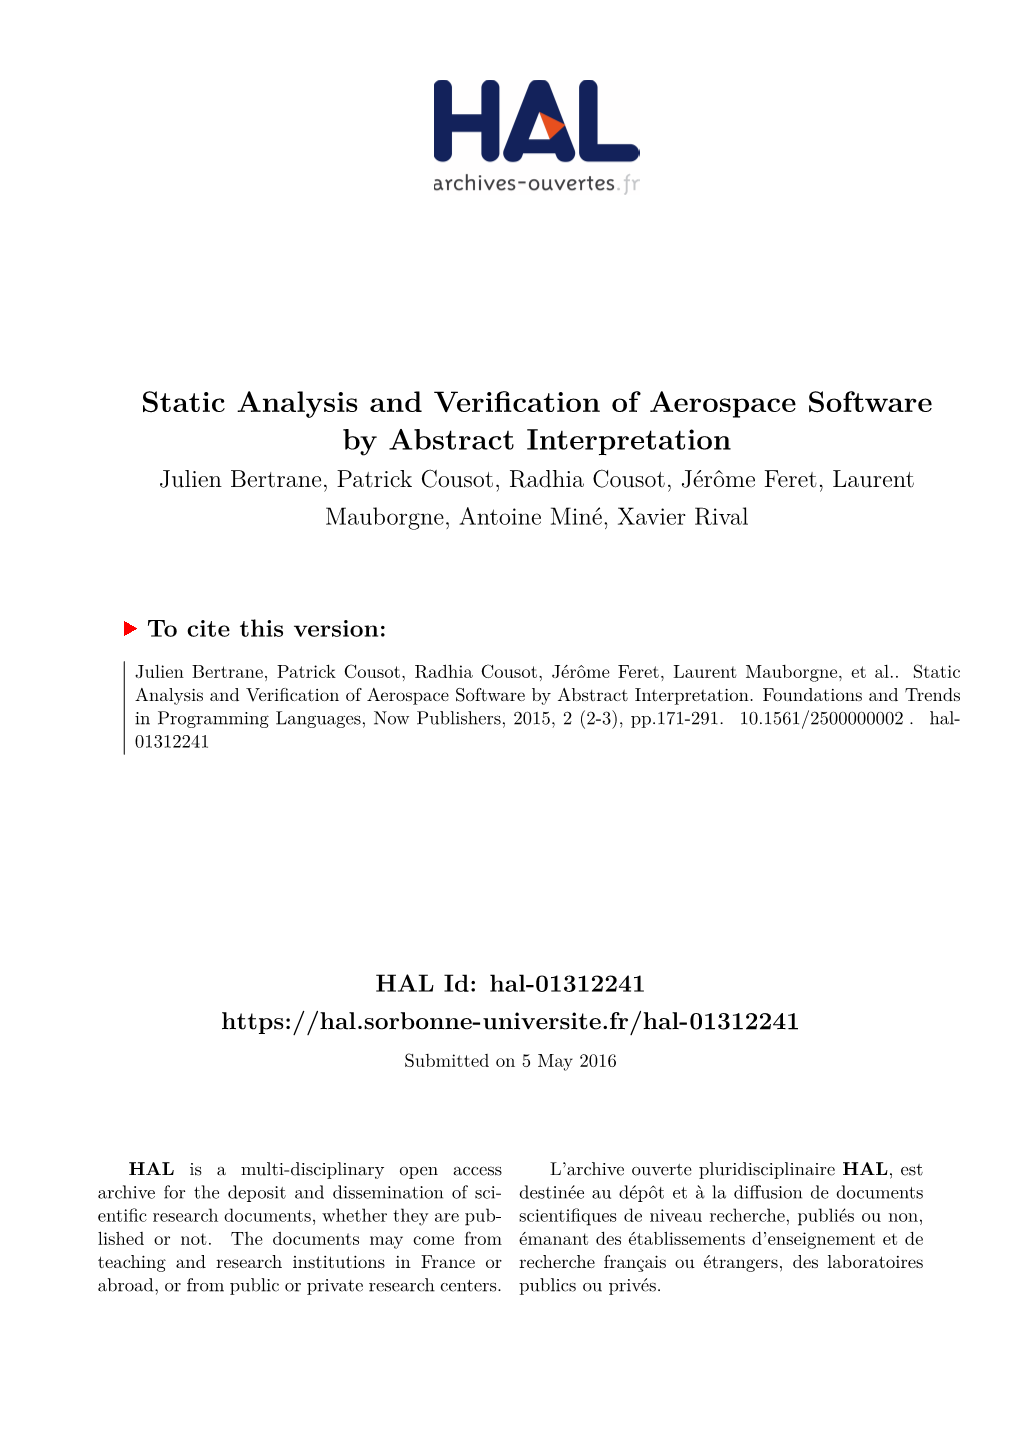 Static Analysis and Verification of Aerospace Software by Abstract